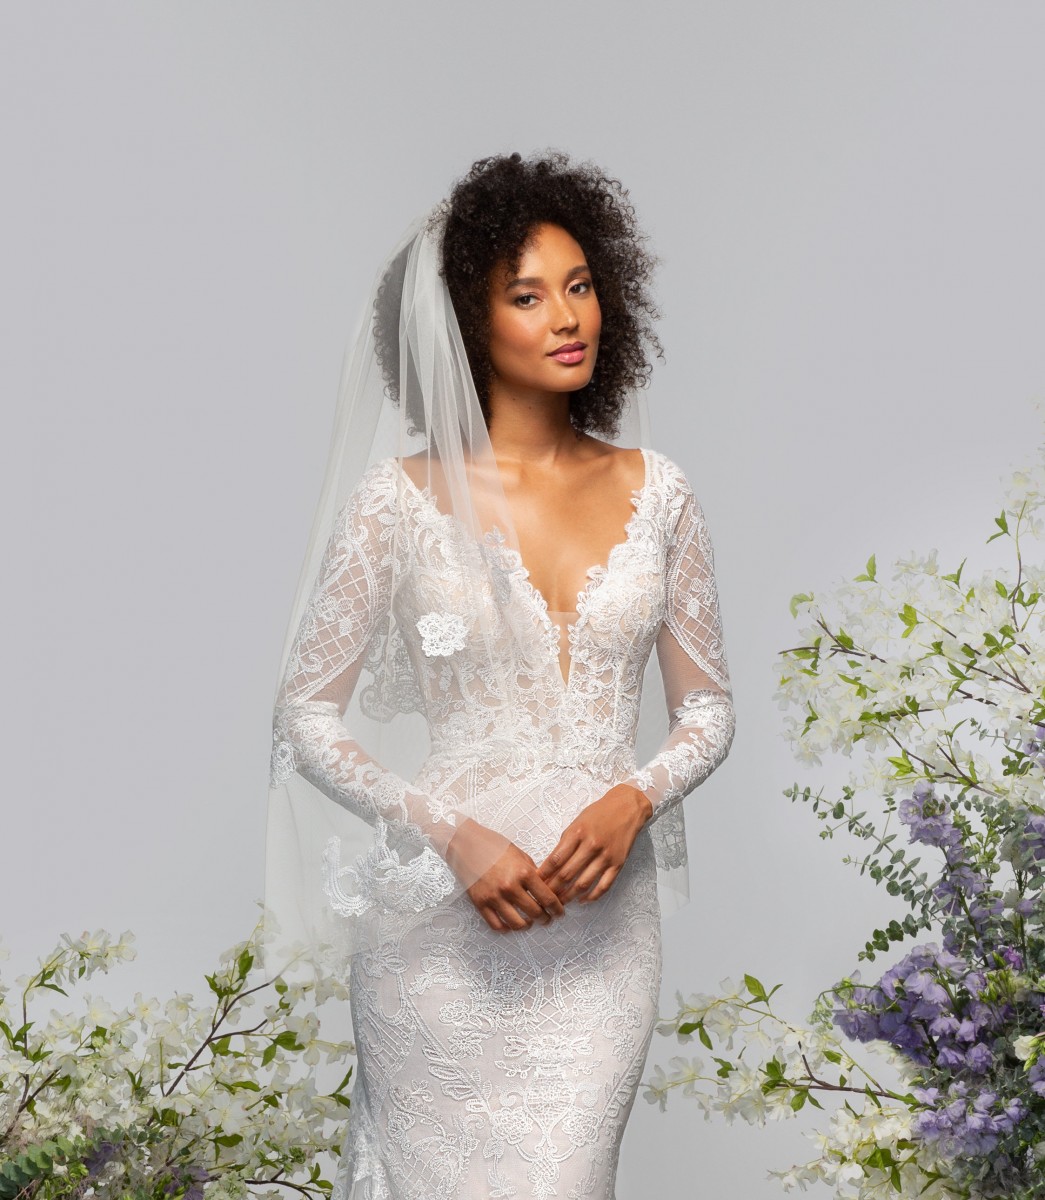 Dreamy Winter Wedding Dress with Lace Sleeves